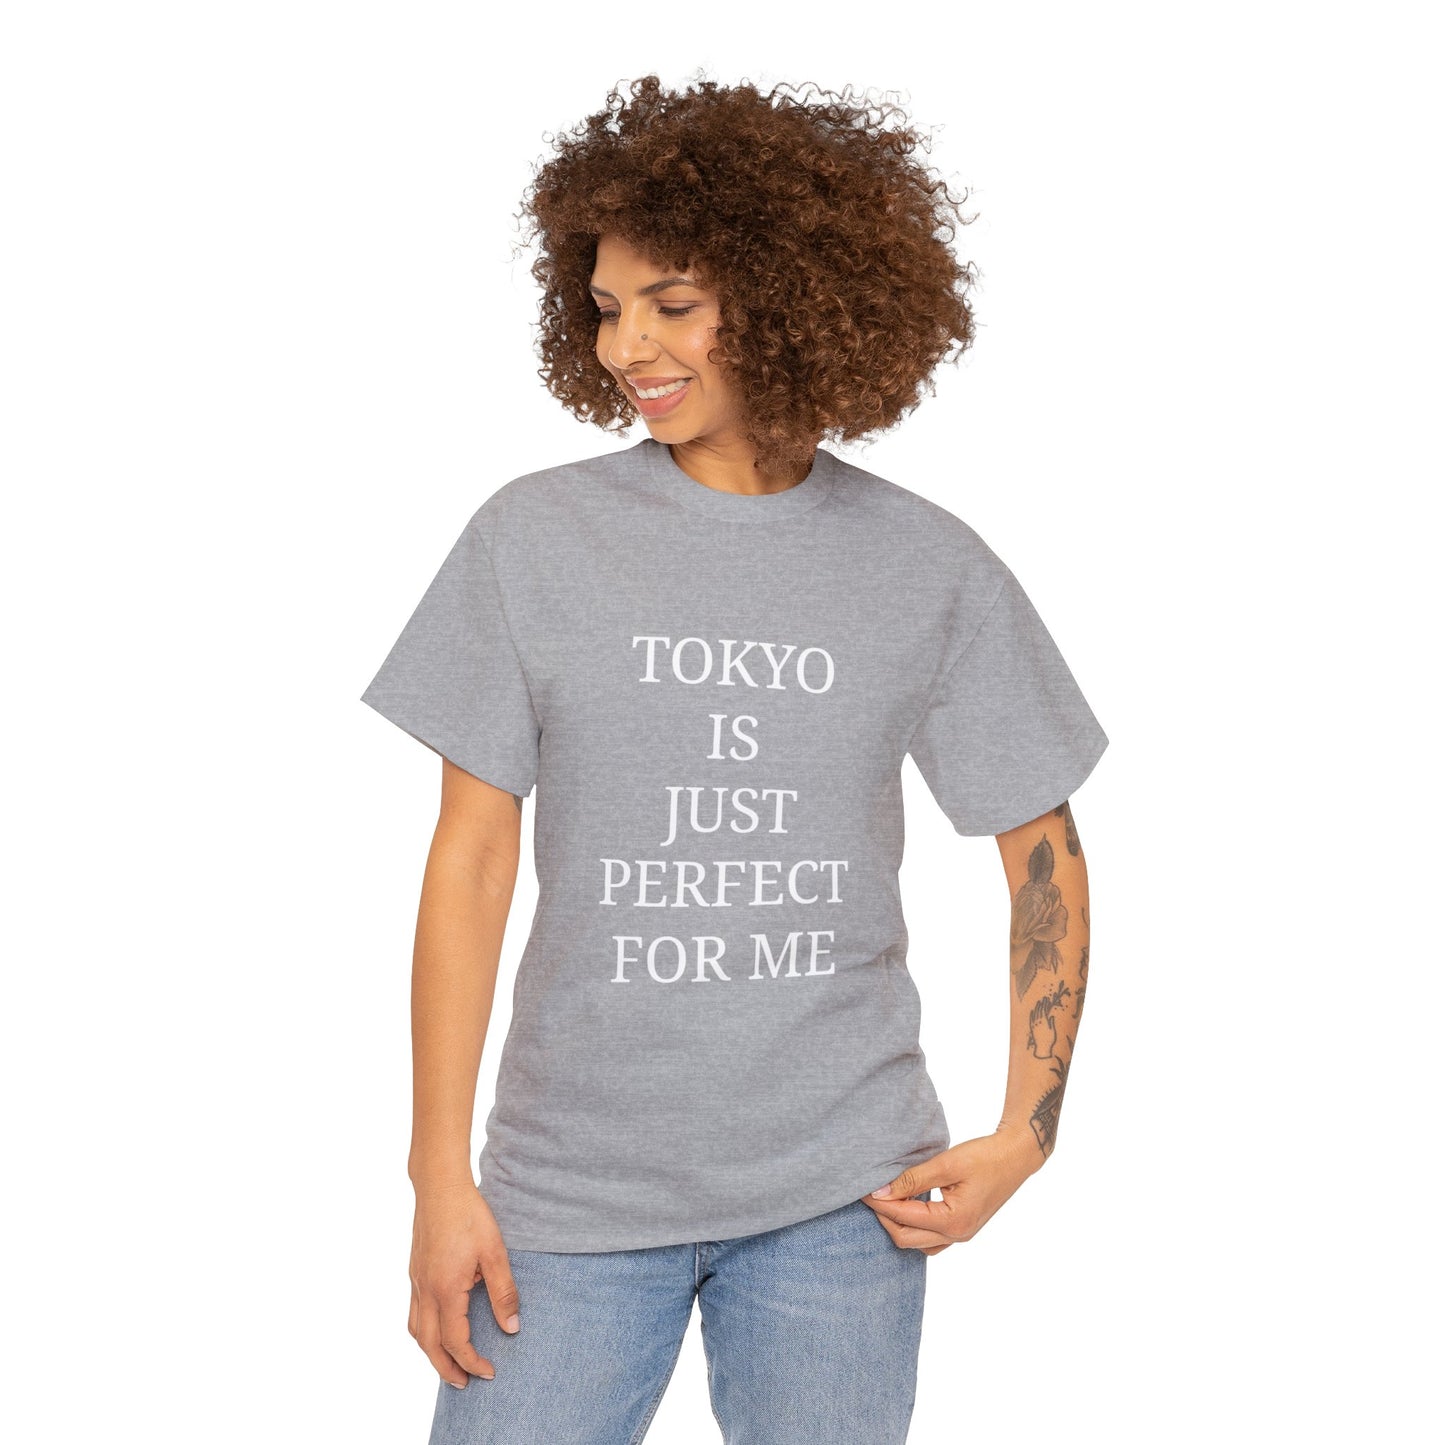 "TOKYO is just perfect for me" Text T-shirt Unisex Heavy Cotton Tee Simple Text for Travelers